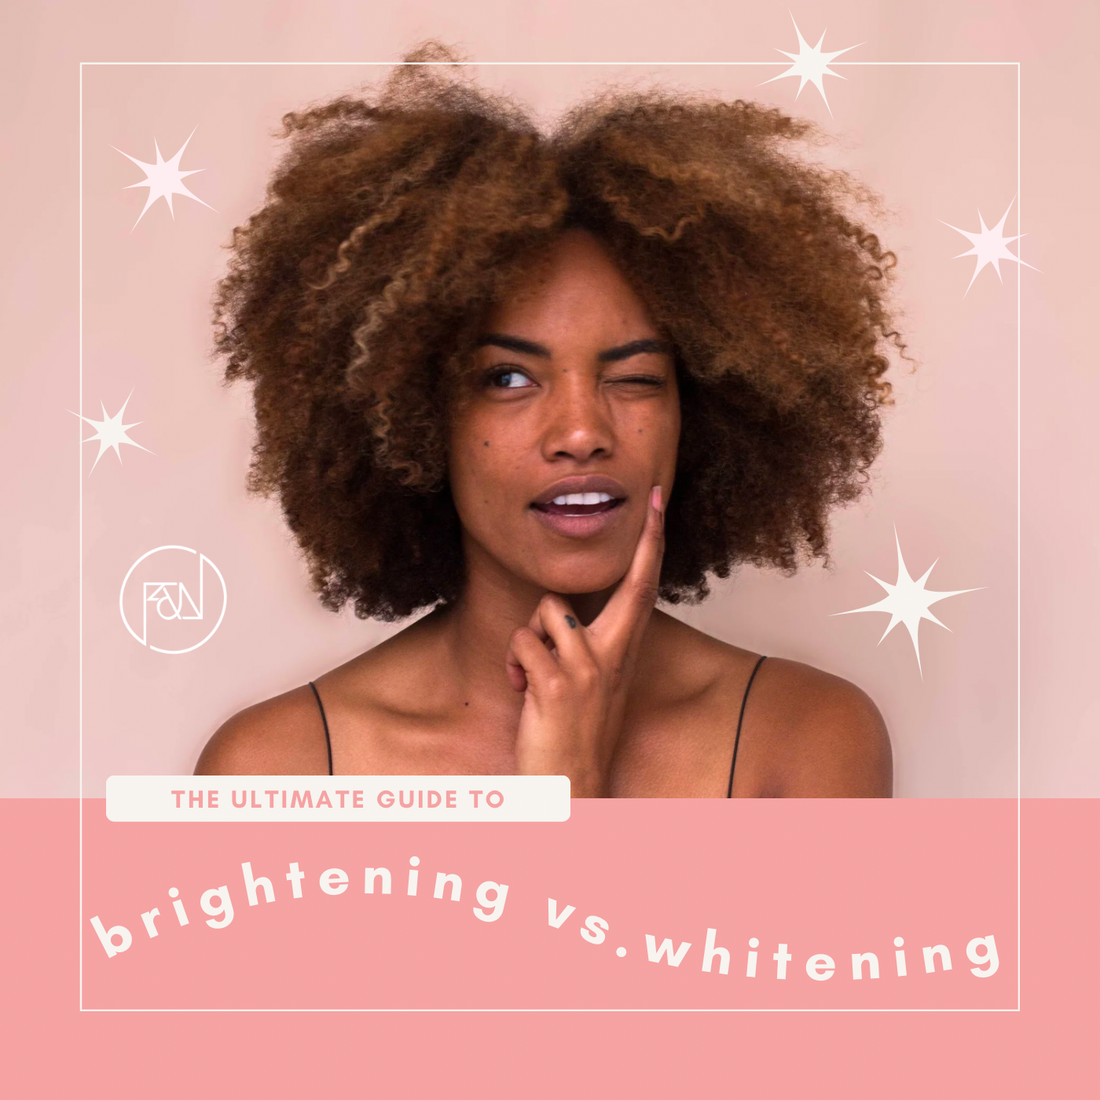 The Ultimate Guide to Brightening vs. Whitening